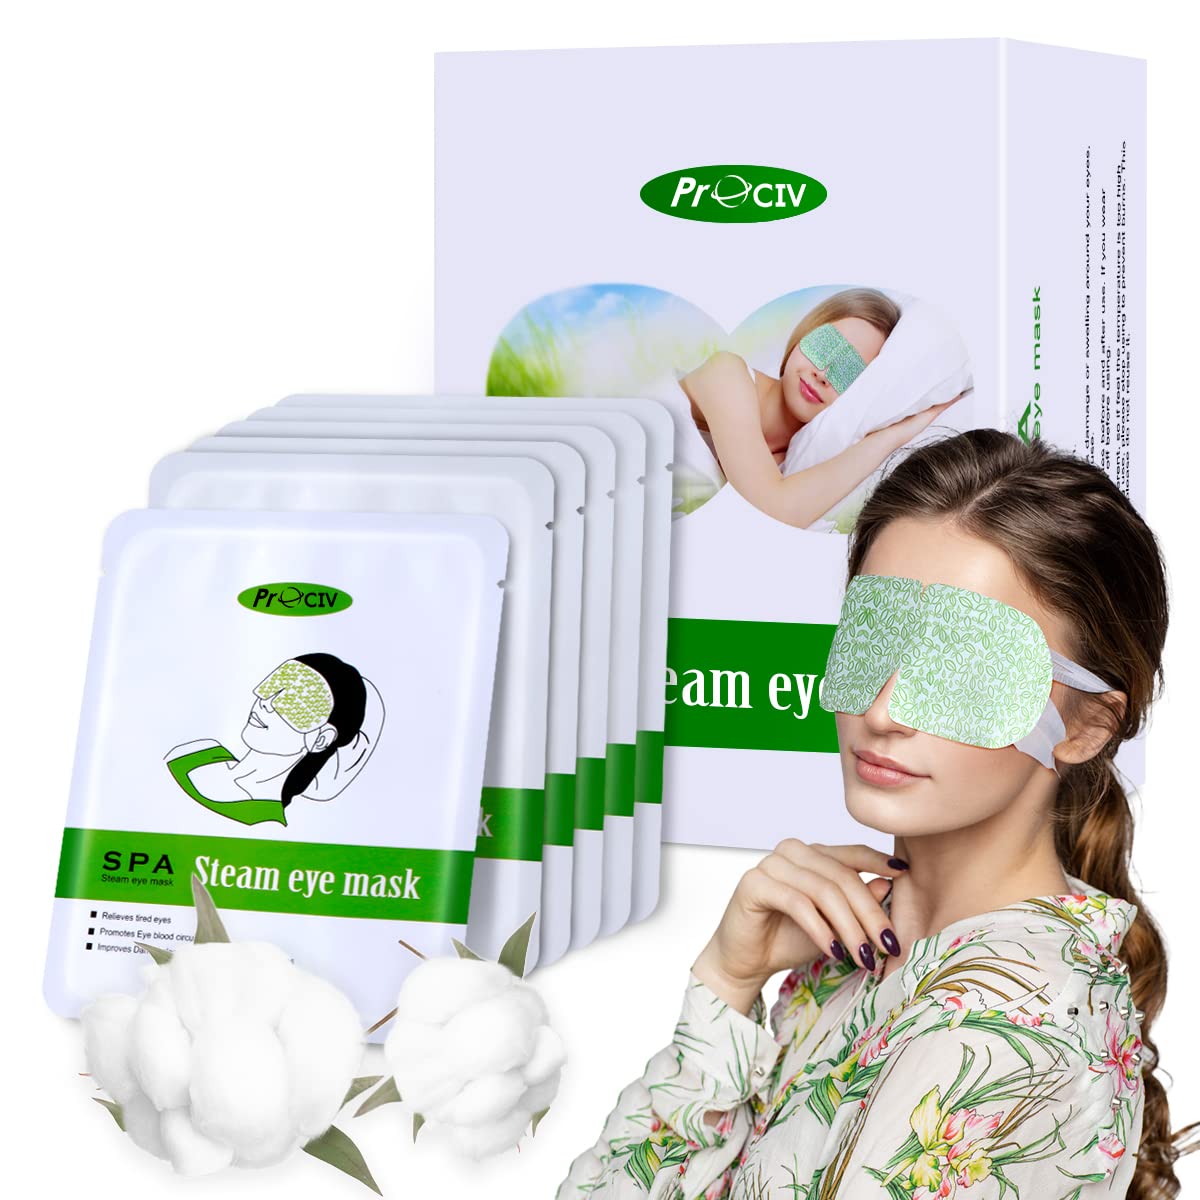 16 Packs Steam Eye Mask for Dry Eye Relief, Hot Auto Heated Eye Masks Soothing Headaches, Warm Eye Compress Mask for Dry Eyes, Eye Compress Moist Heat Relieve Eye Fatigue, Stress, and Migraine